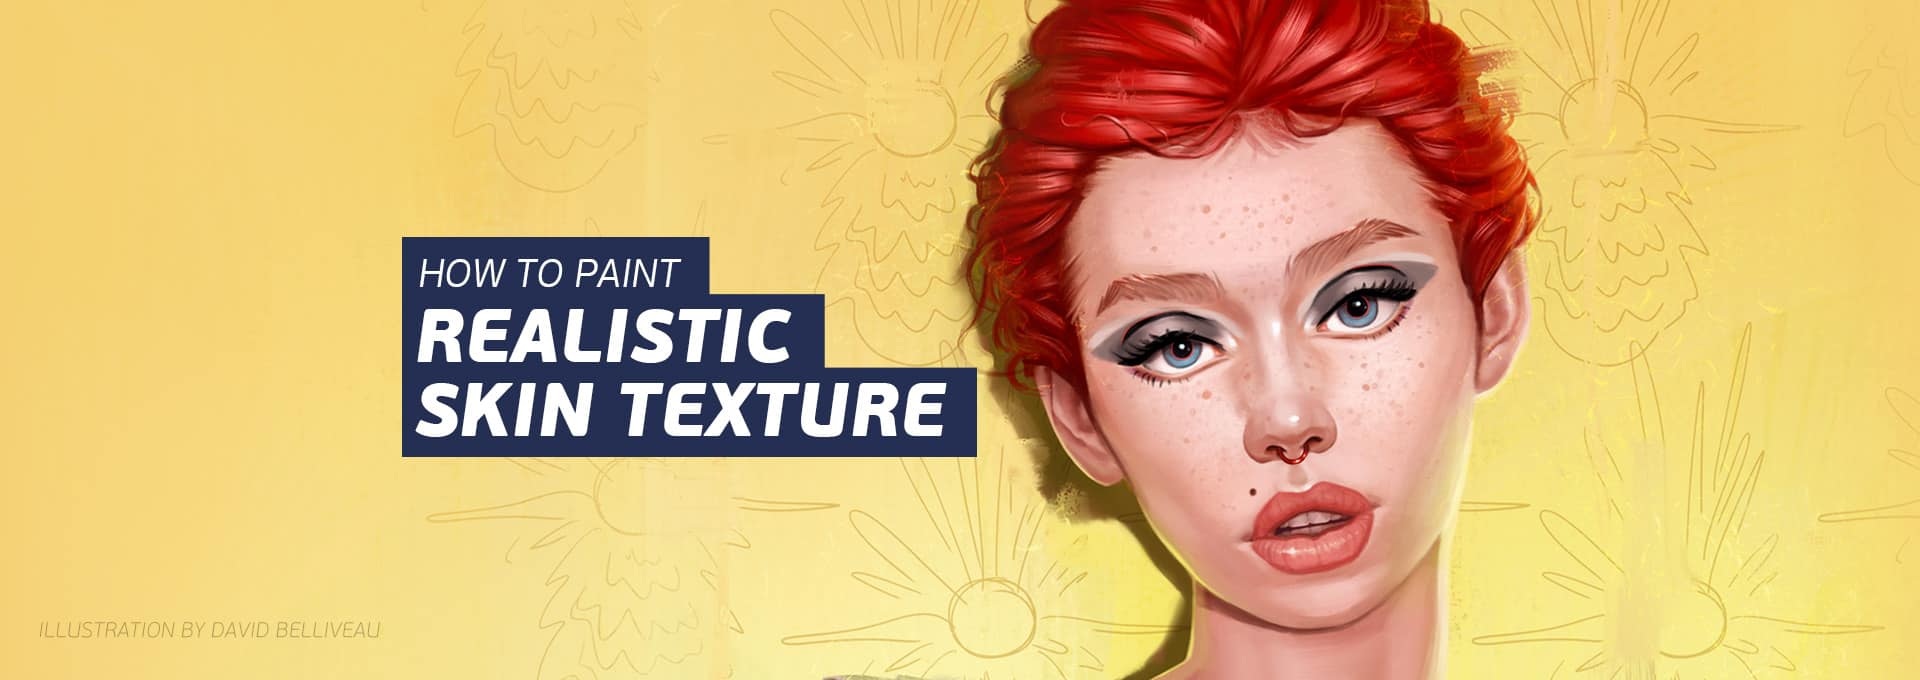 How to paint realistic skin texture